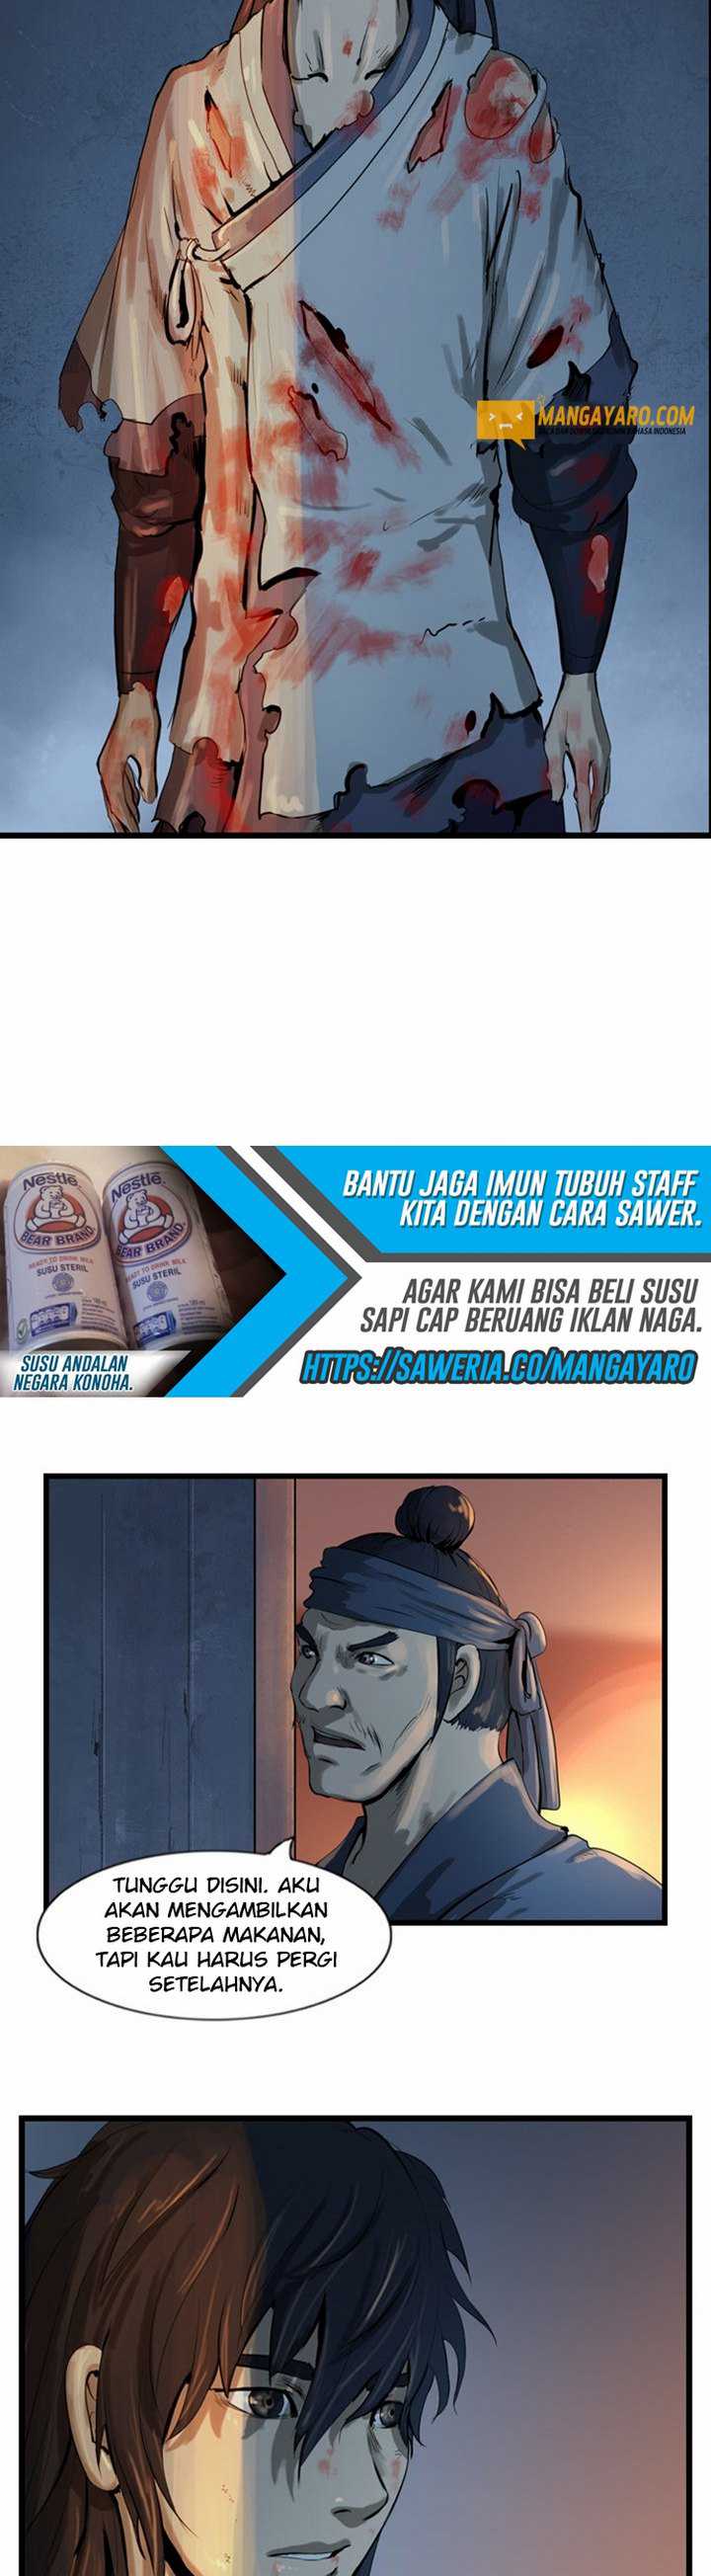 The Wanderer Chapter 25.1 bahasa indonesia